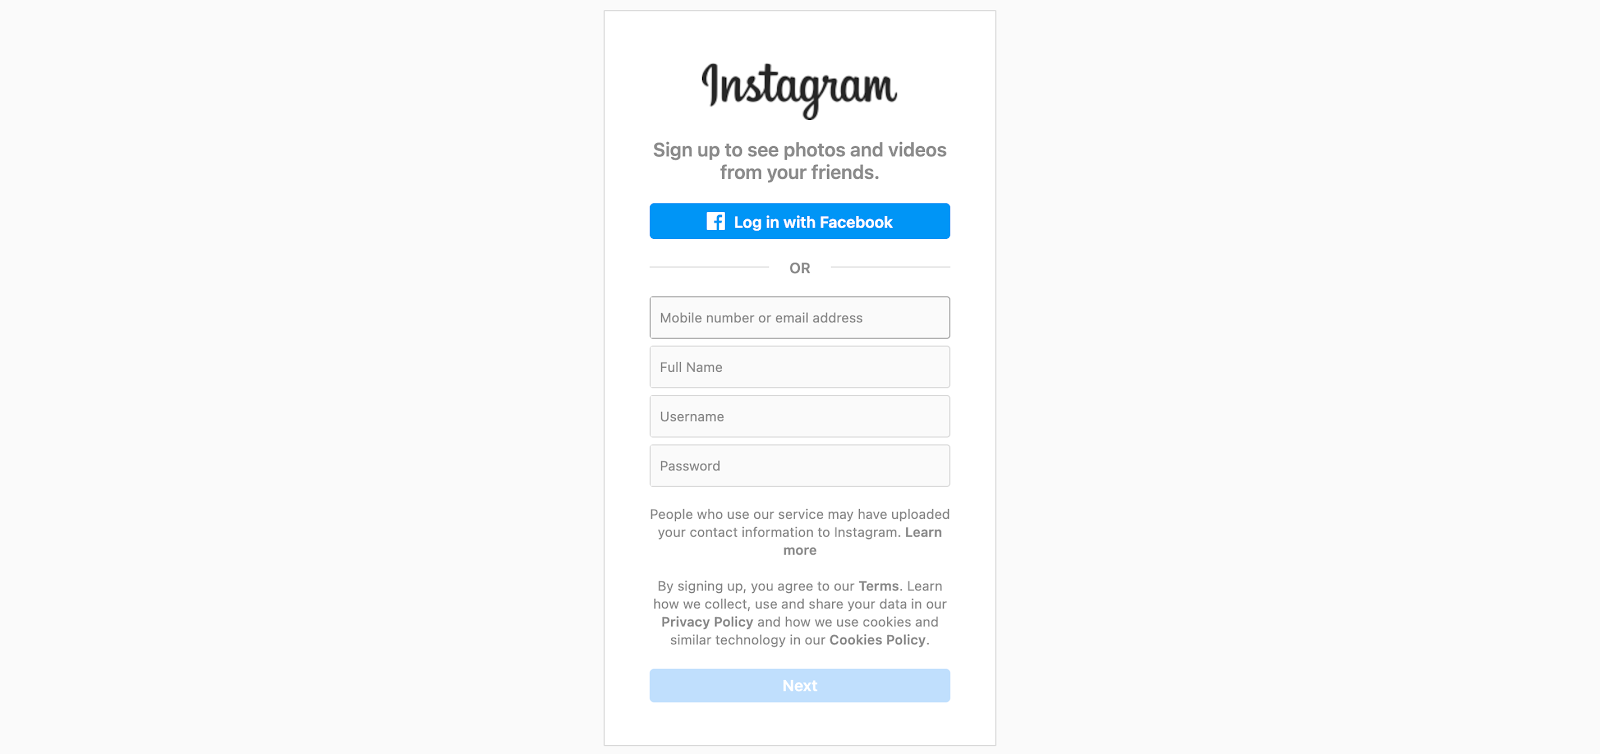 This is how starting an Instagram account looks like on a desktop browser.